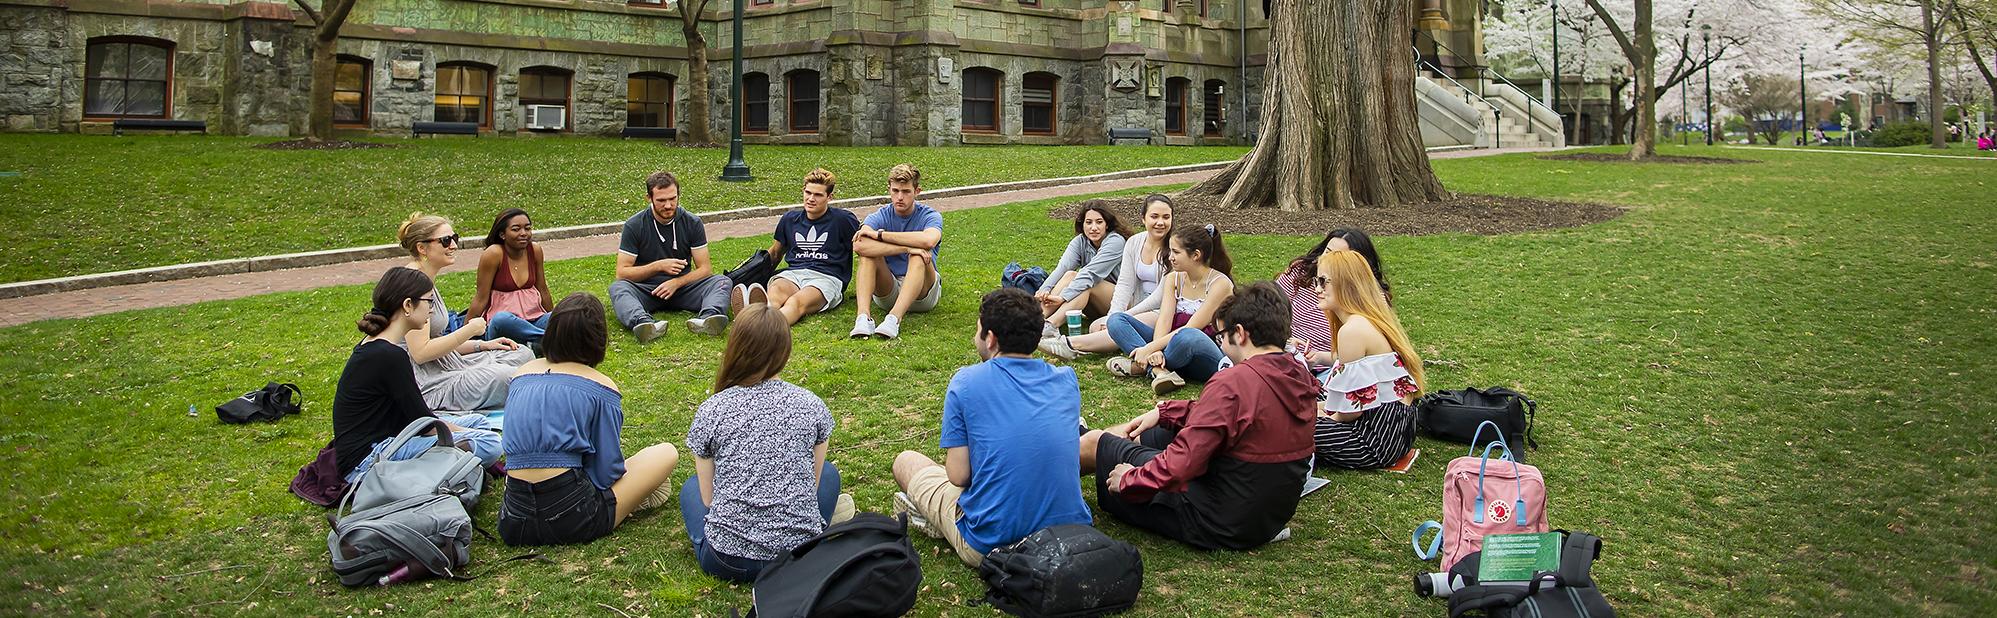 Students gathered in a circle on the lawn in spring under a flowering tree on Penn campus